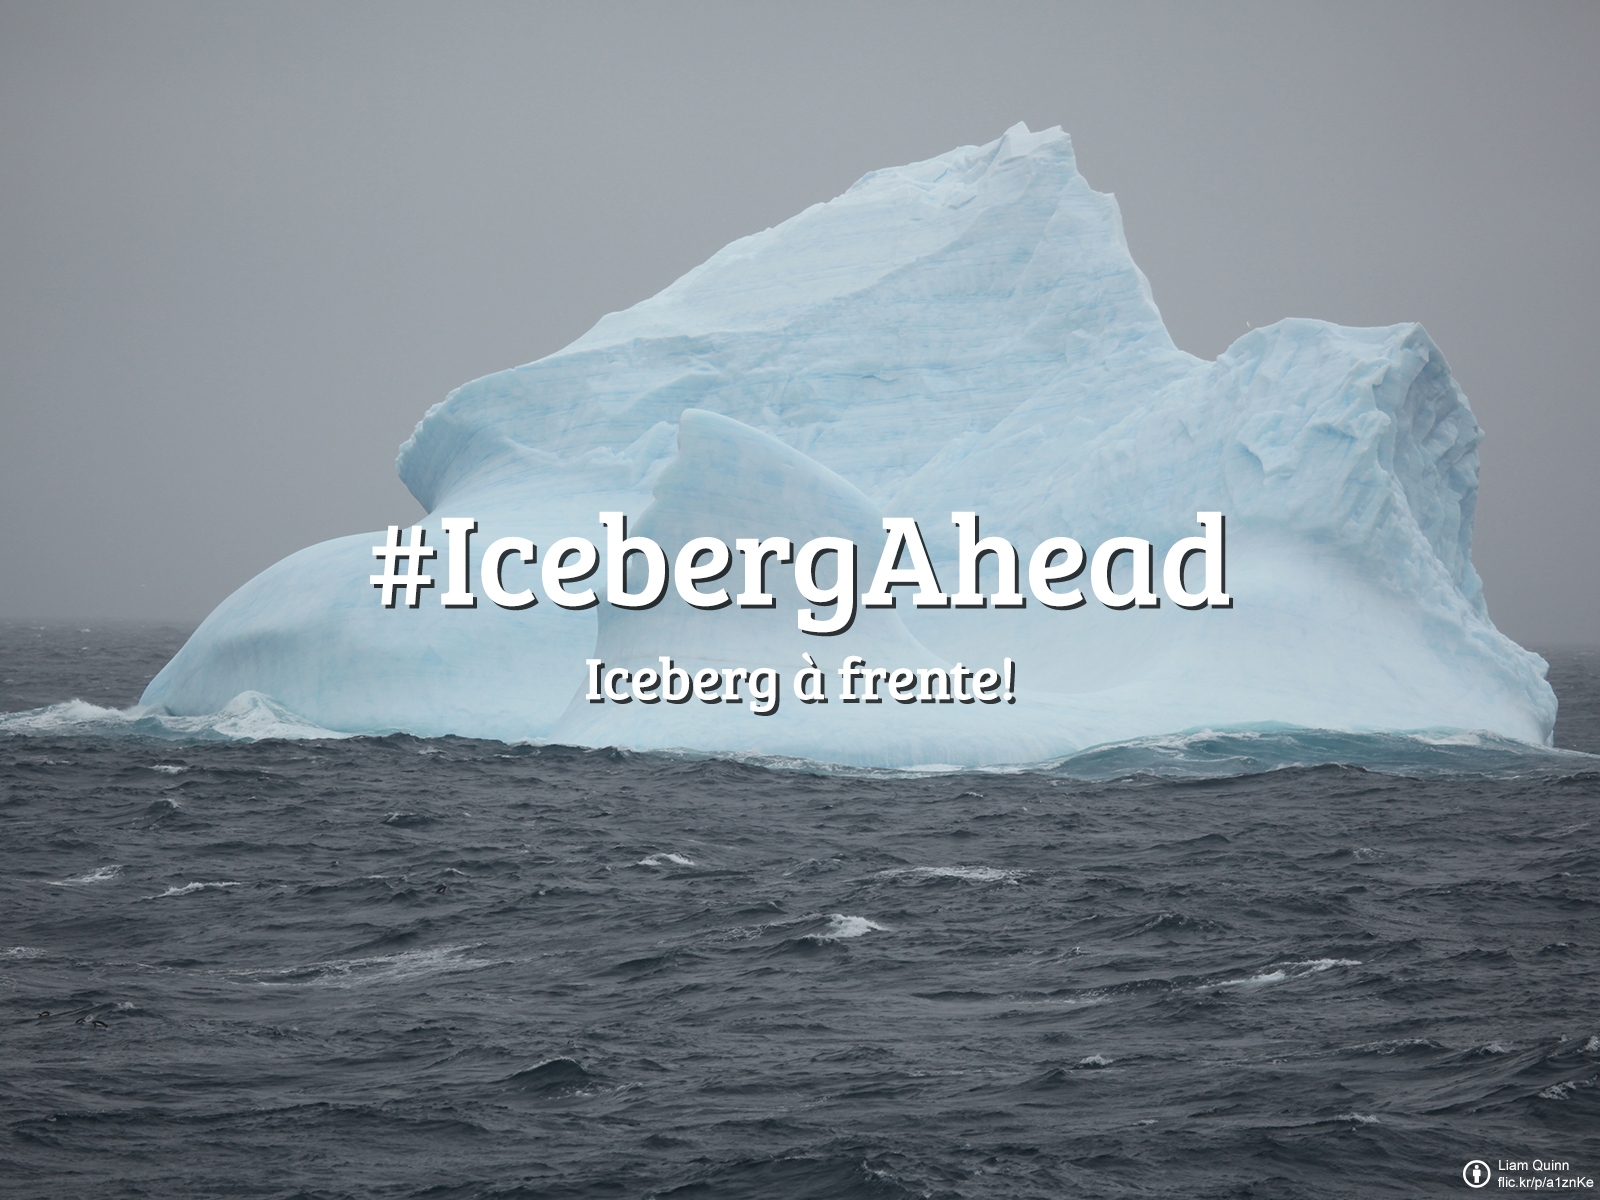 #FlickrFriday: Iceberg Ahead. Sometimes we have to face crisis in our life, just like an iceberg ahead. We can only see the 10% floating above the water, but the 90% under water is what really matters. Take a shot of it and share it for Flickr Friday!